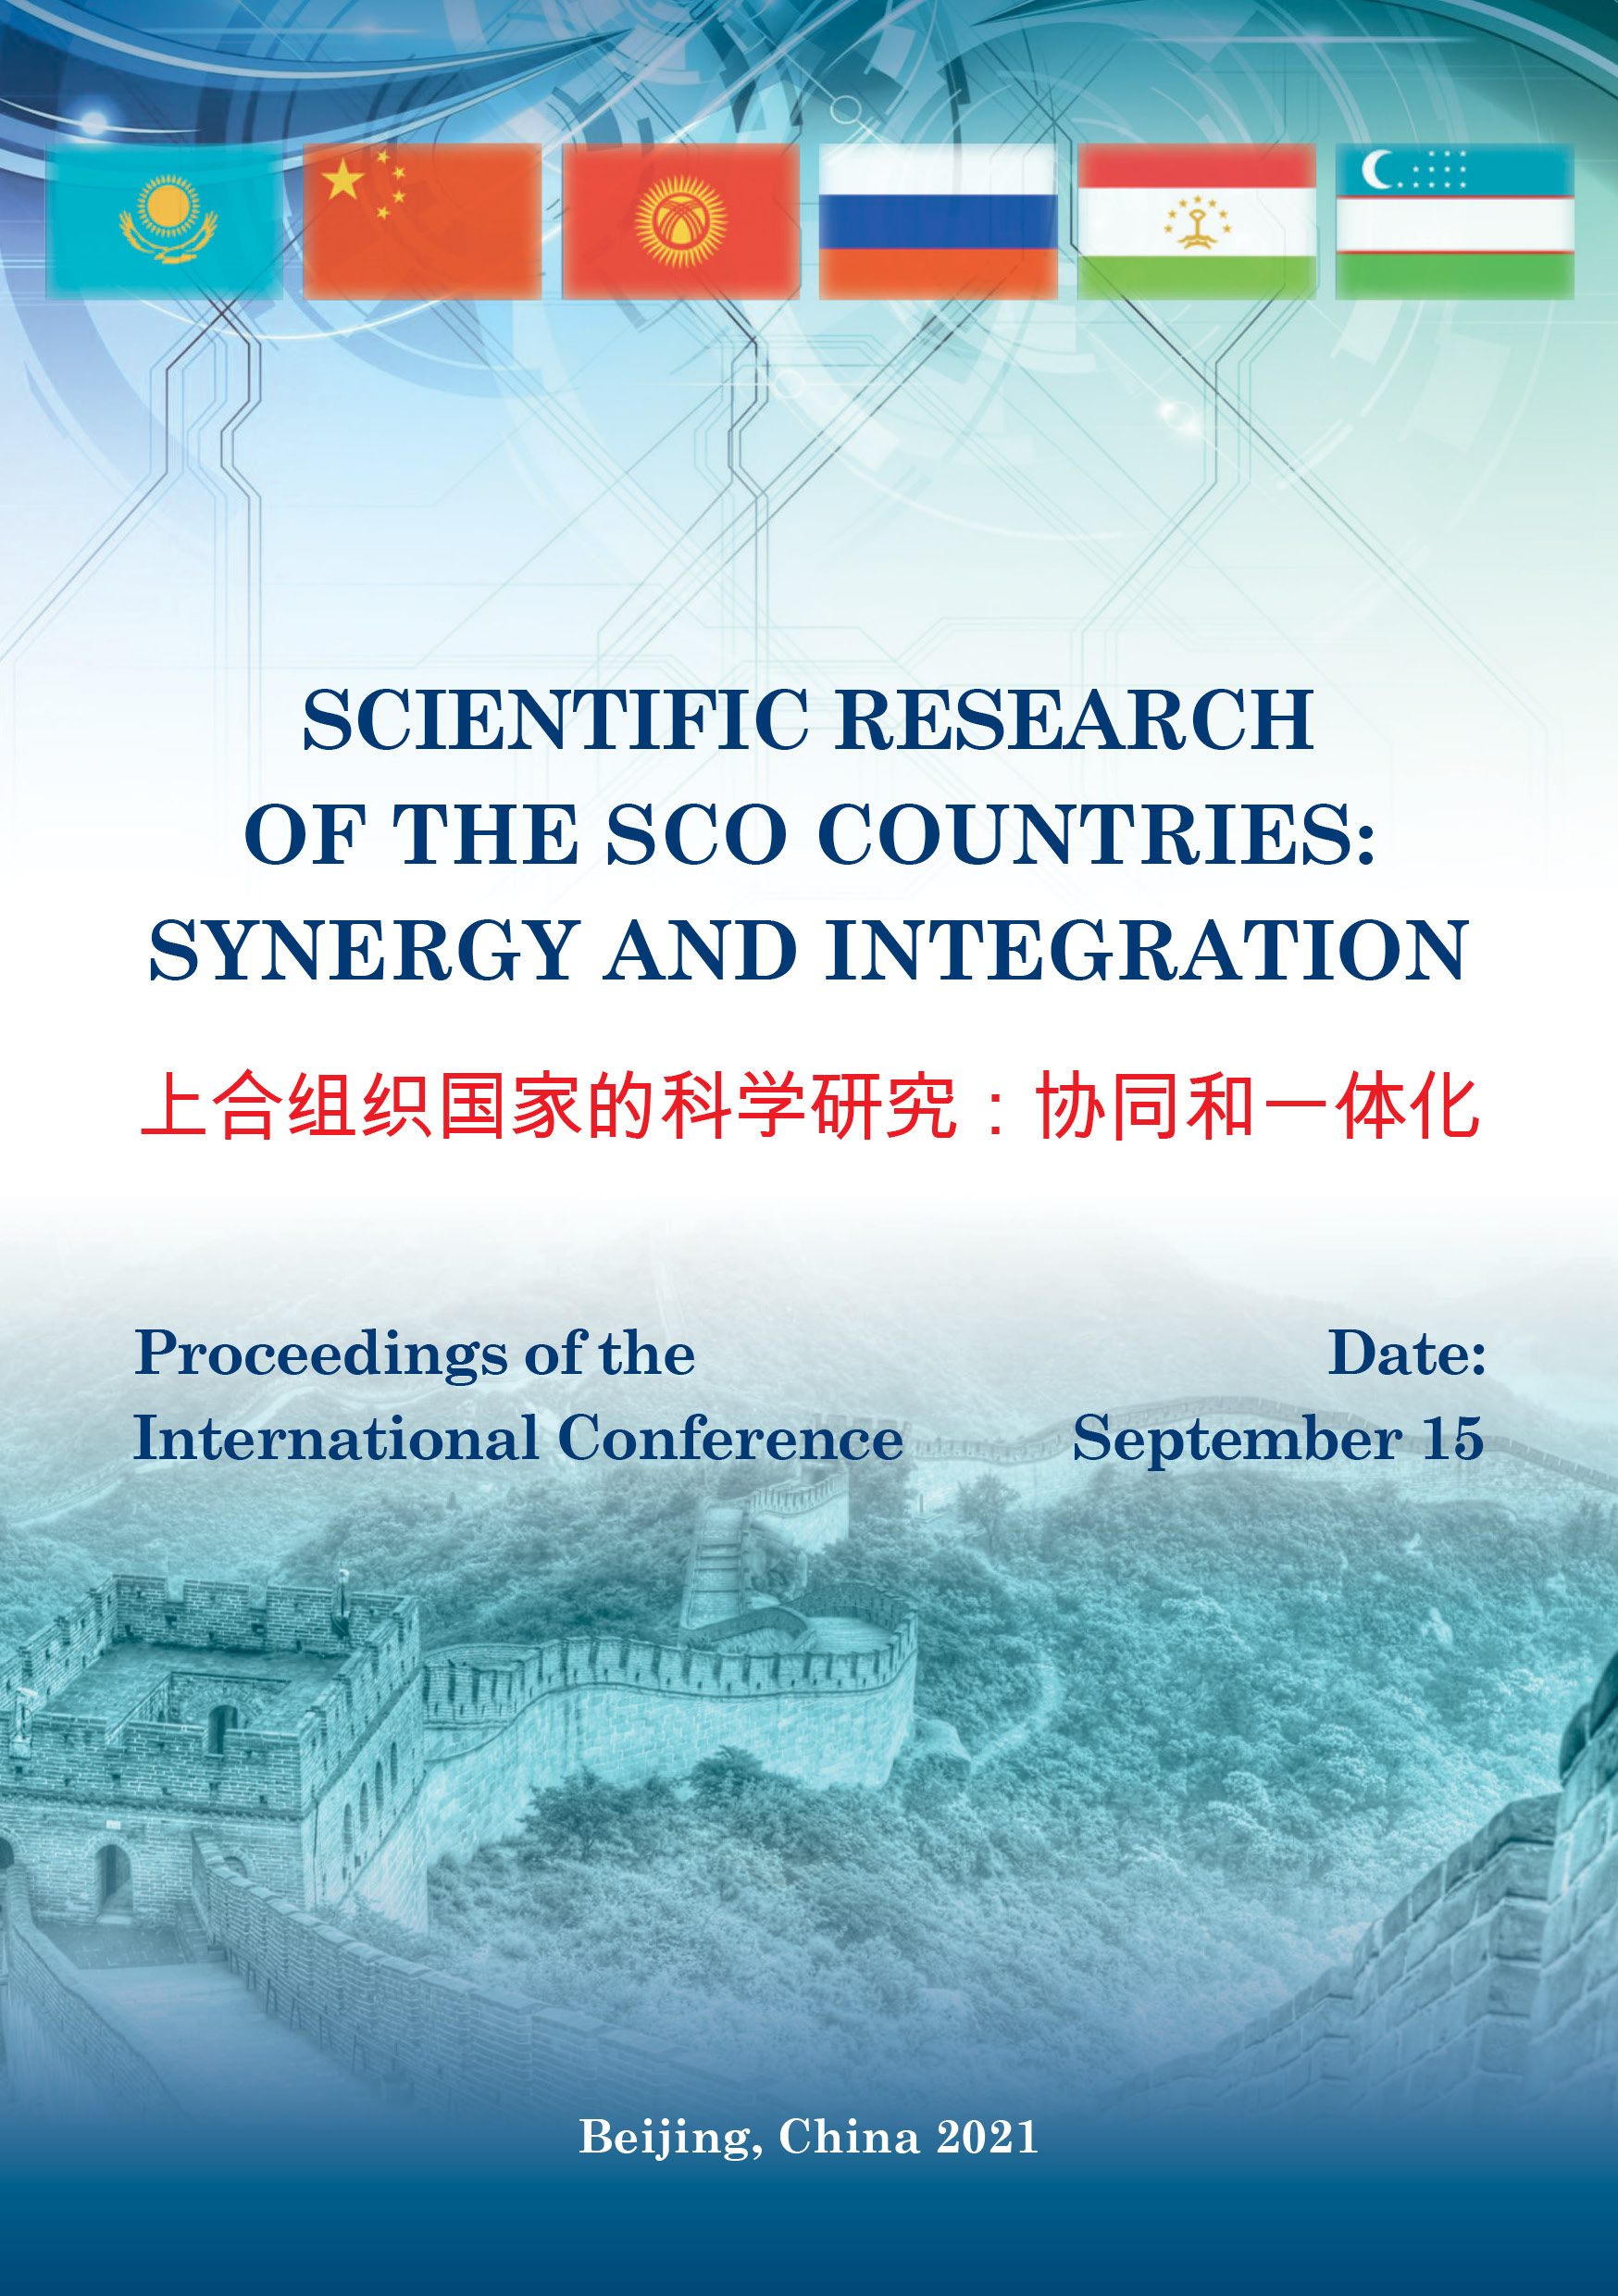                         SCIENTIFIC RESEARCH OF THE SCO COUNTRIES: SYNERGY AND INTEGRATION. September 15, 2021. Beijing, PRC
            